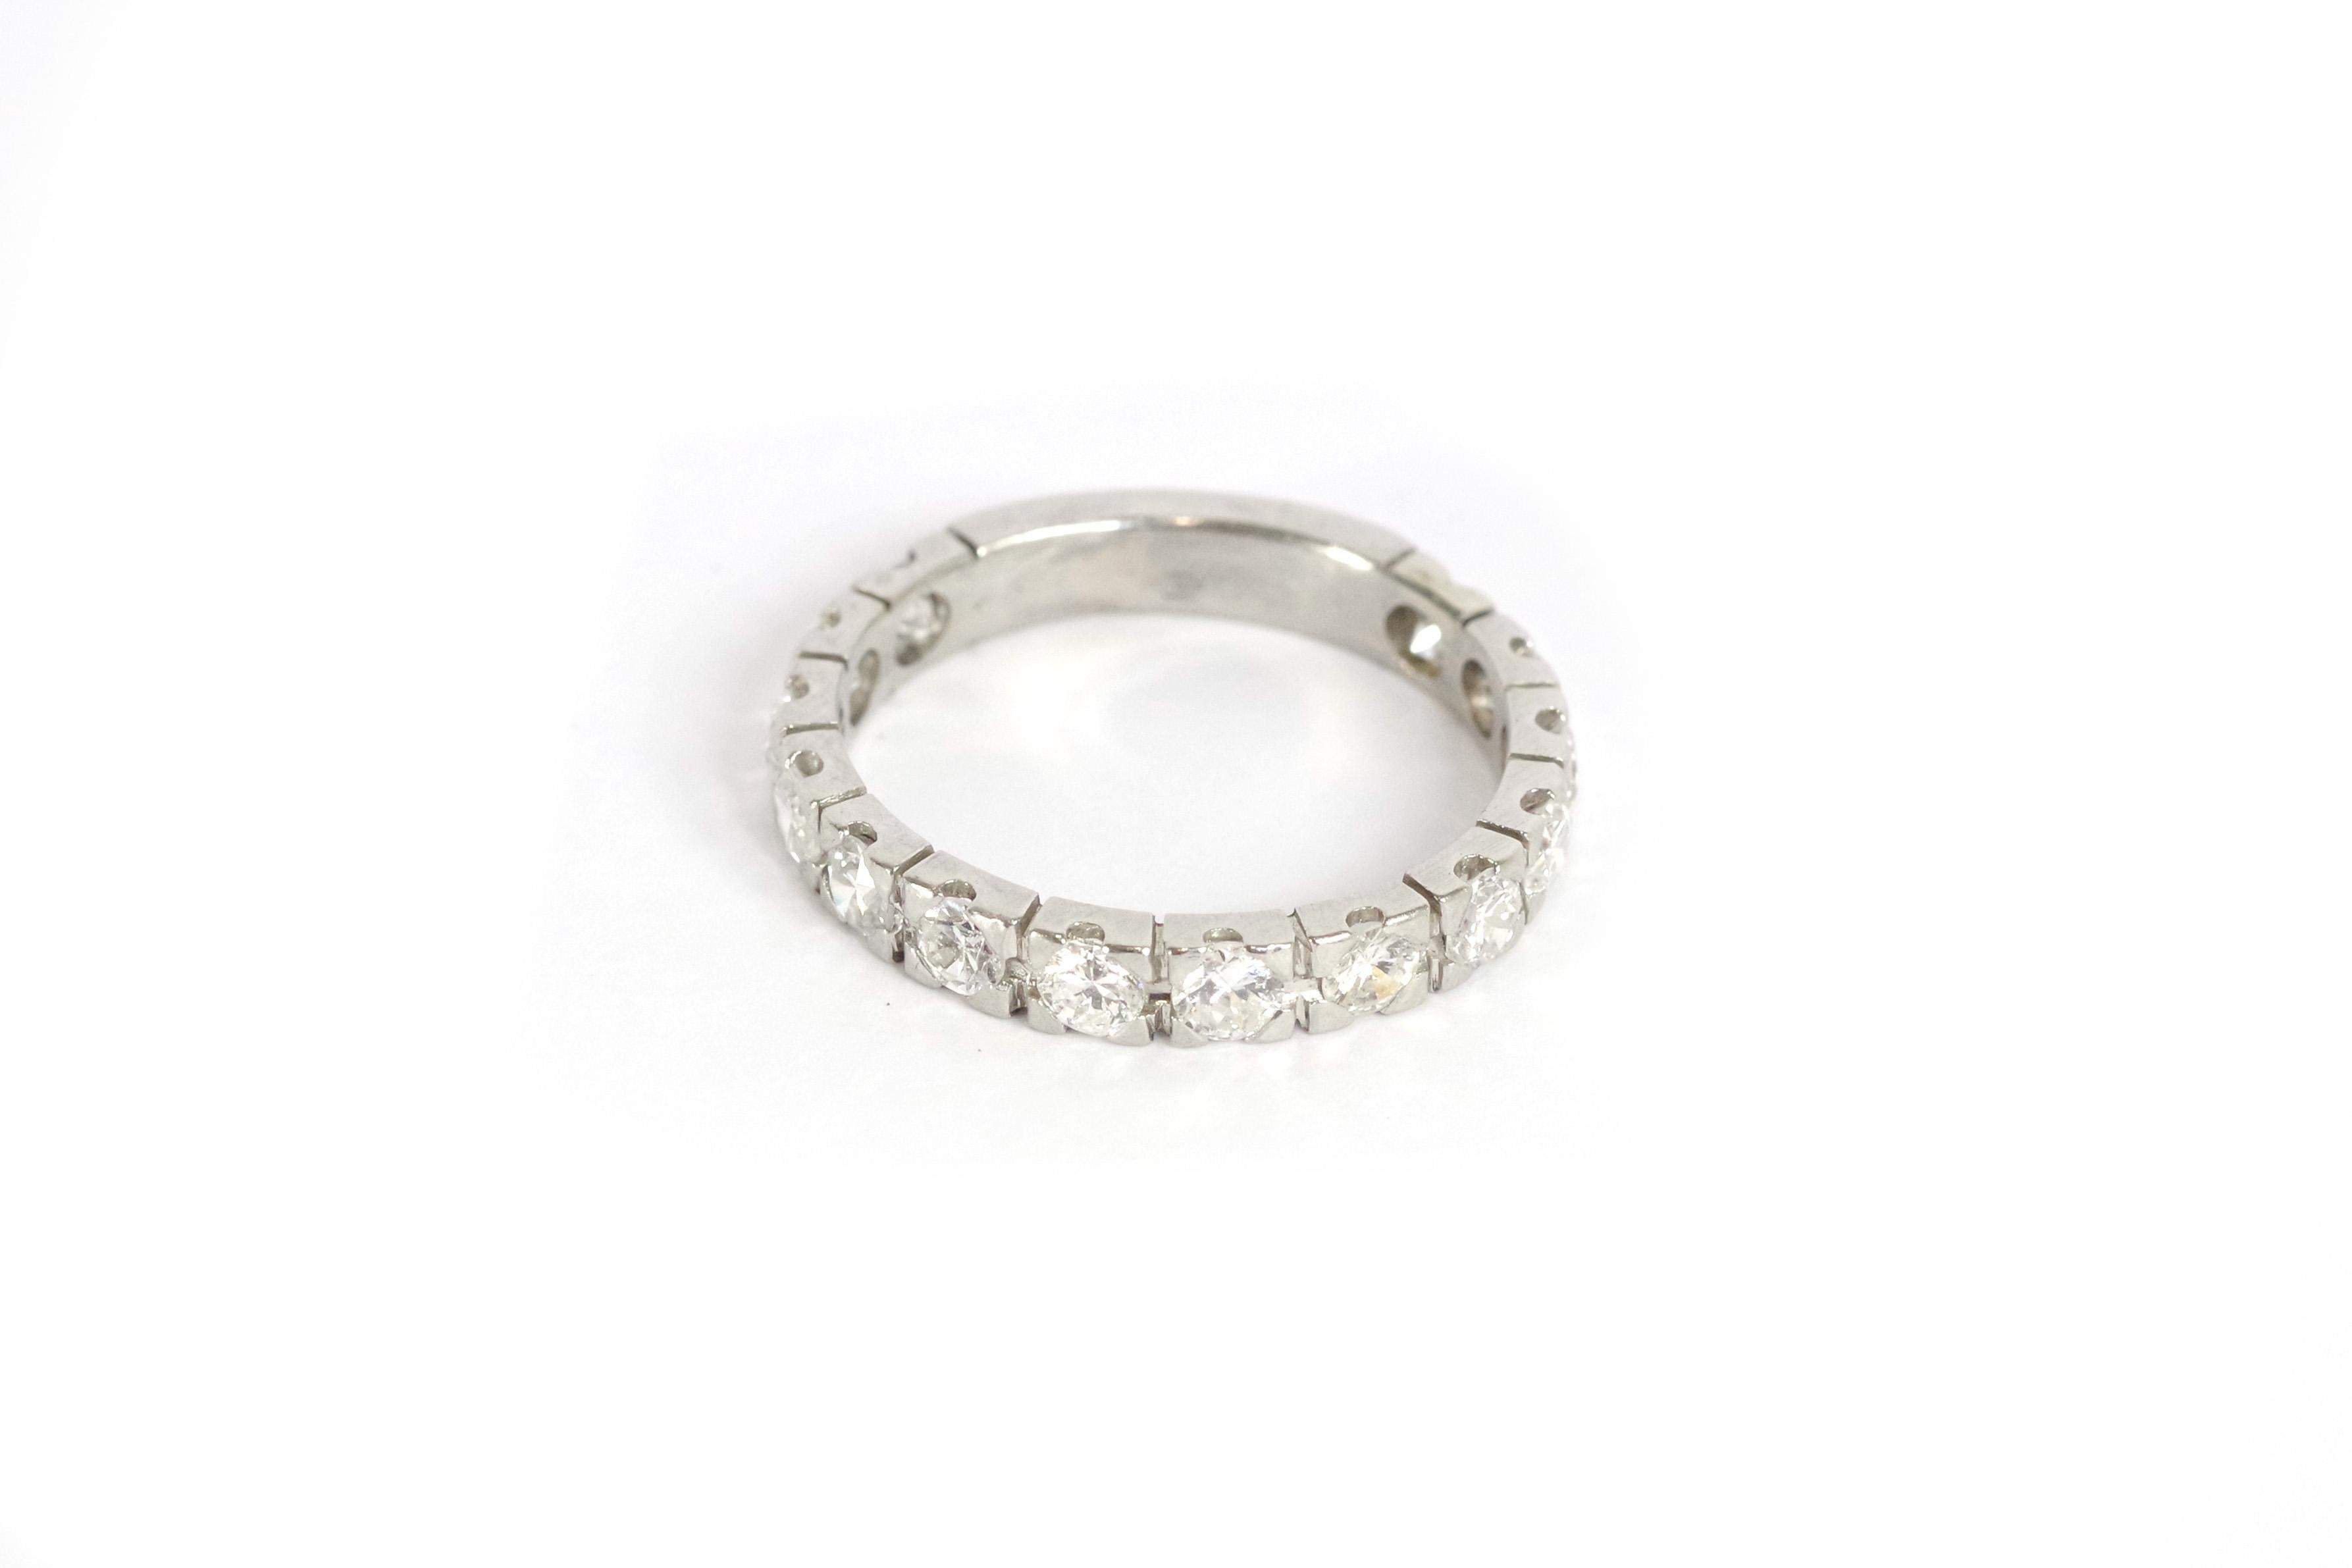 Half eternity ring band in platinum and diamonds. American half wedding band set with 14 brilliant-cut diamonds on a gray platinum setting. Antique wedding band from the early 20th century. 

Dog-head hallmark (french state hallmark for